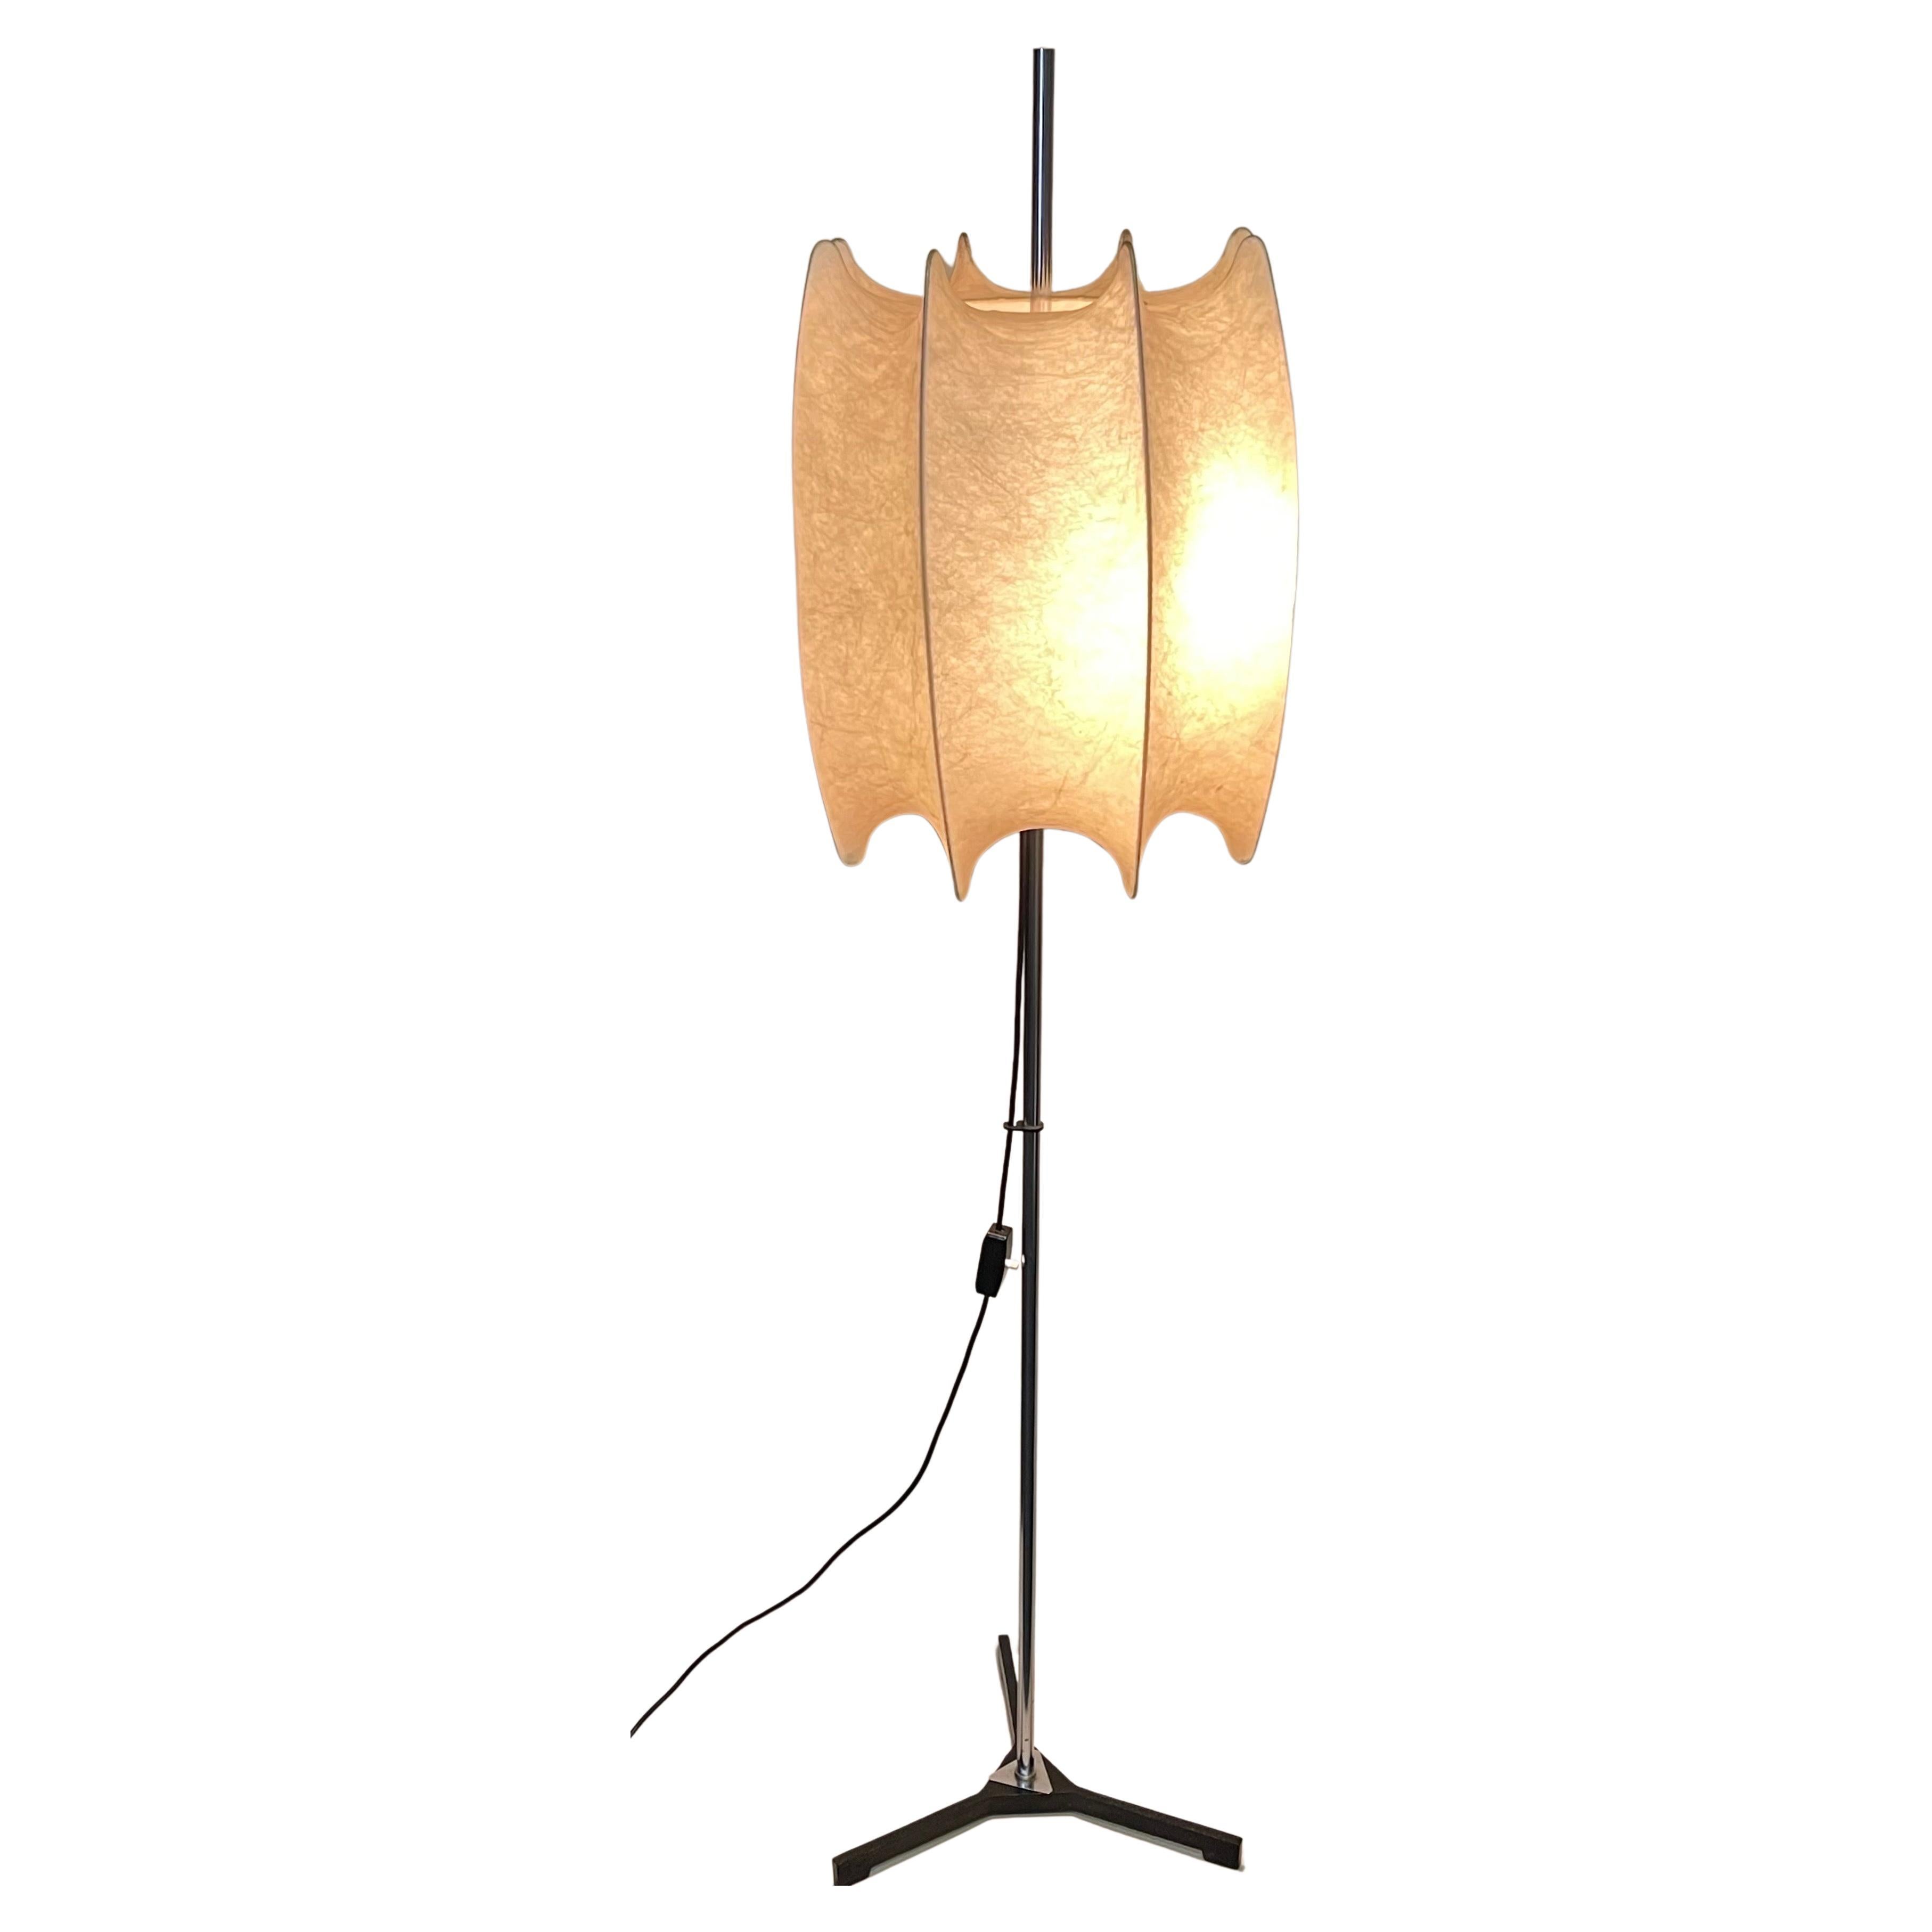 Rare Mid-Century Modern German cocoon floor lamp attr. to Goldkant Leuchten, 1960s.
Socket: two x E27 or E26 (US) for standard screw bulbs.